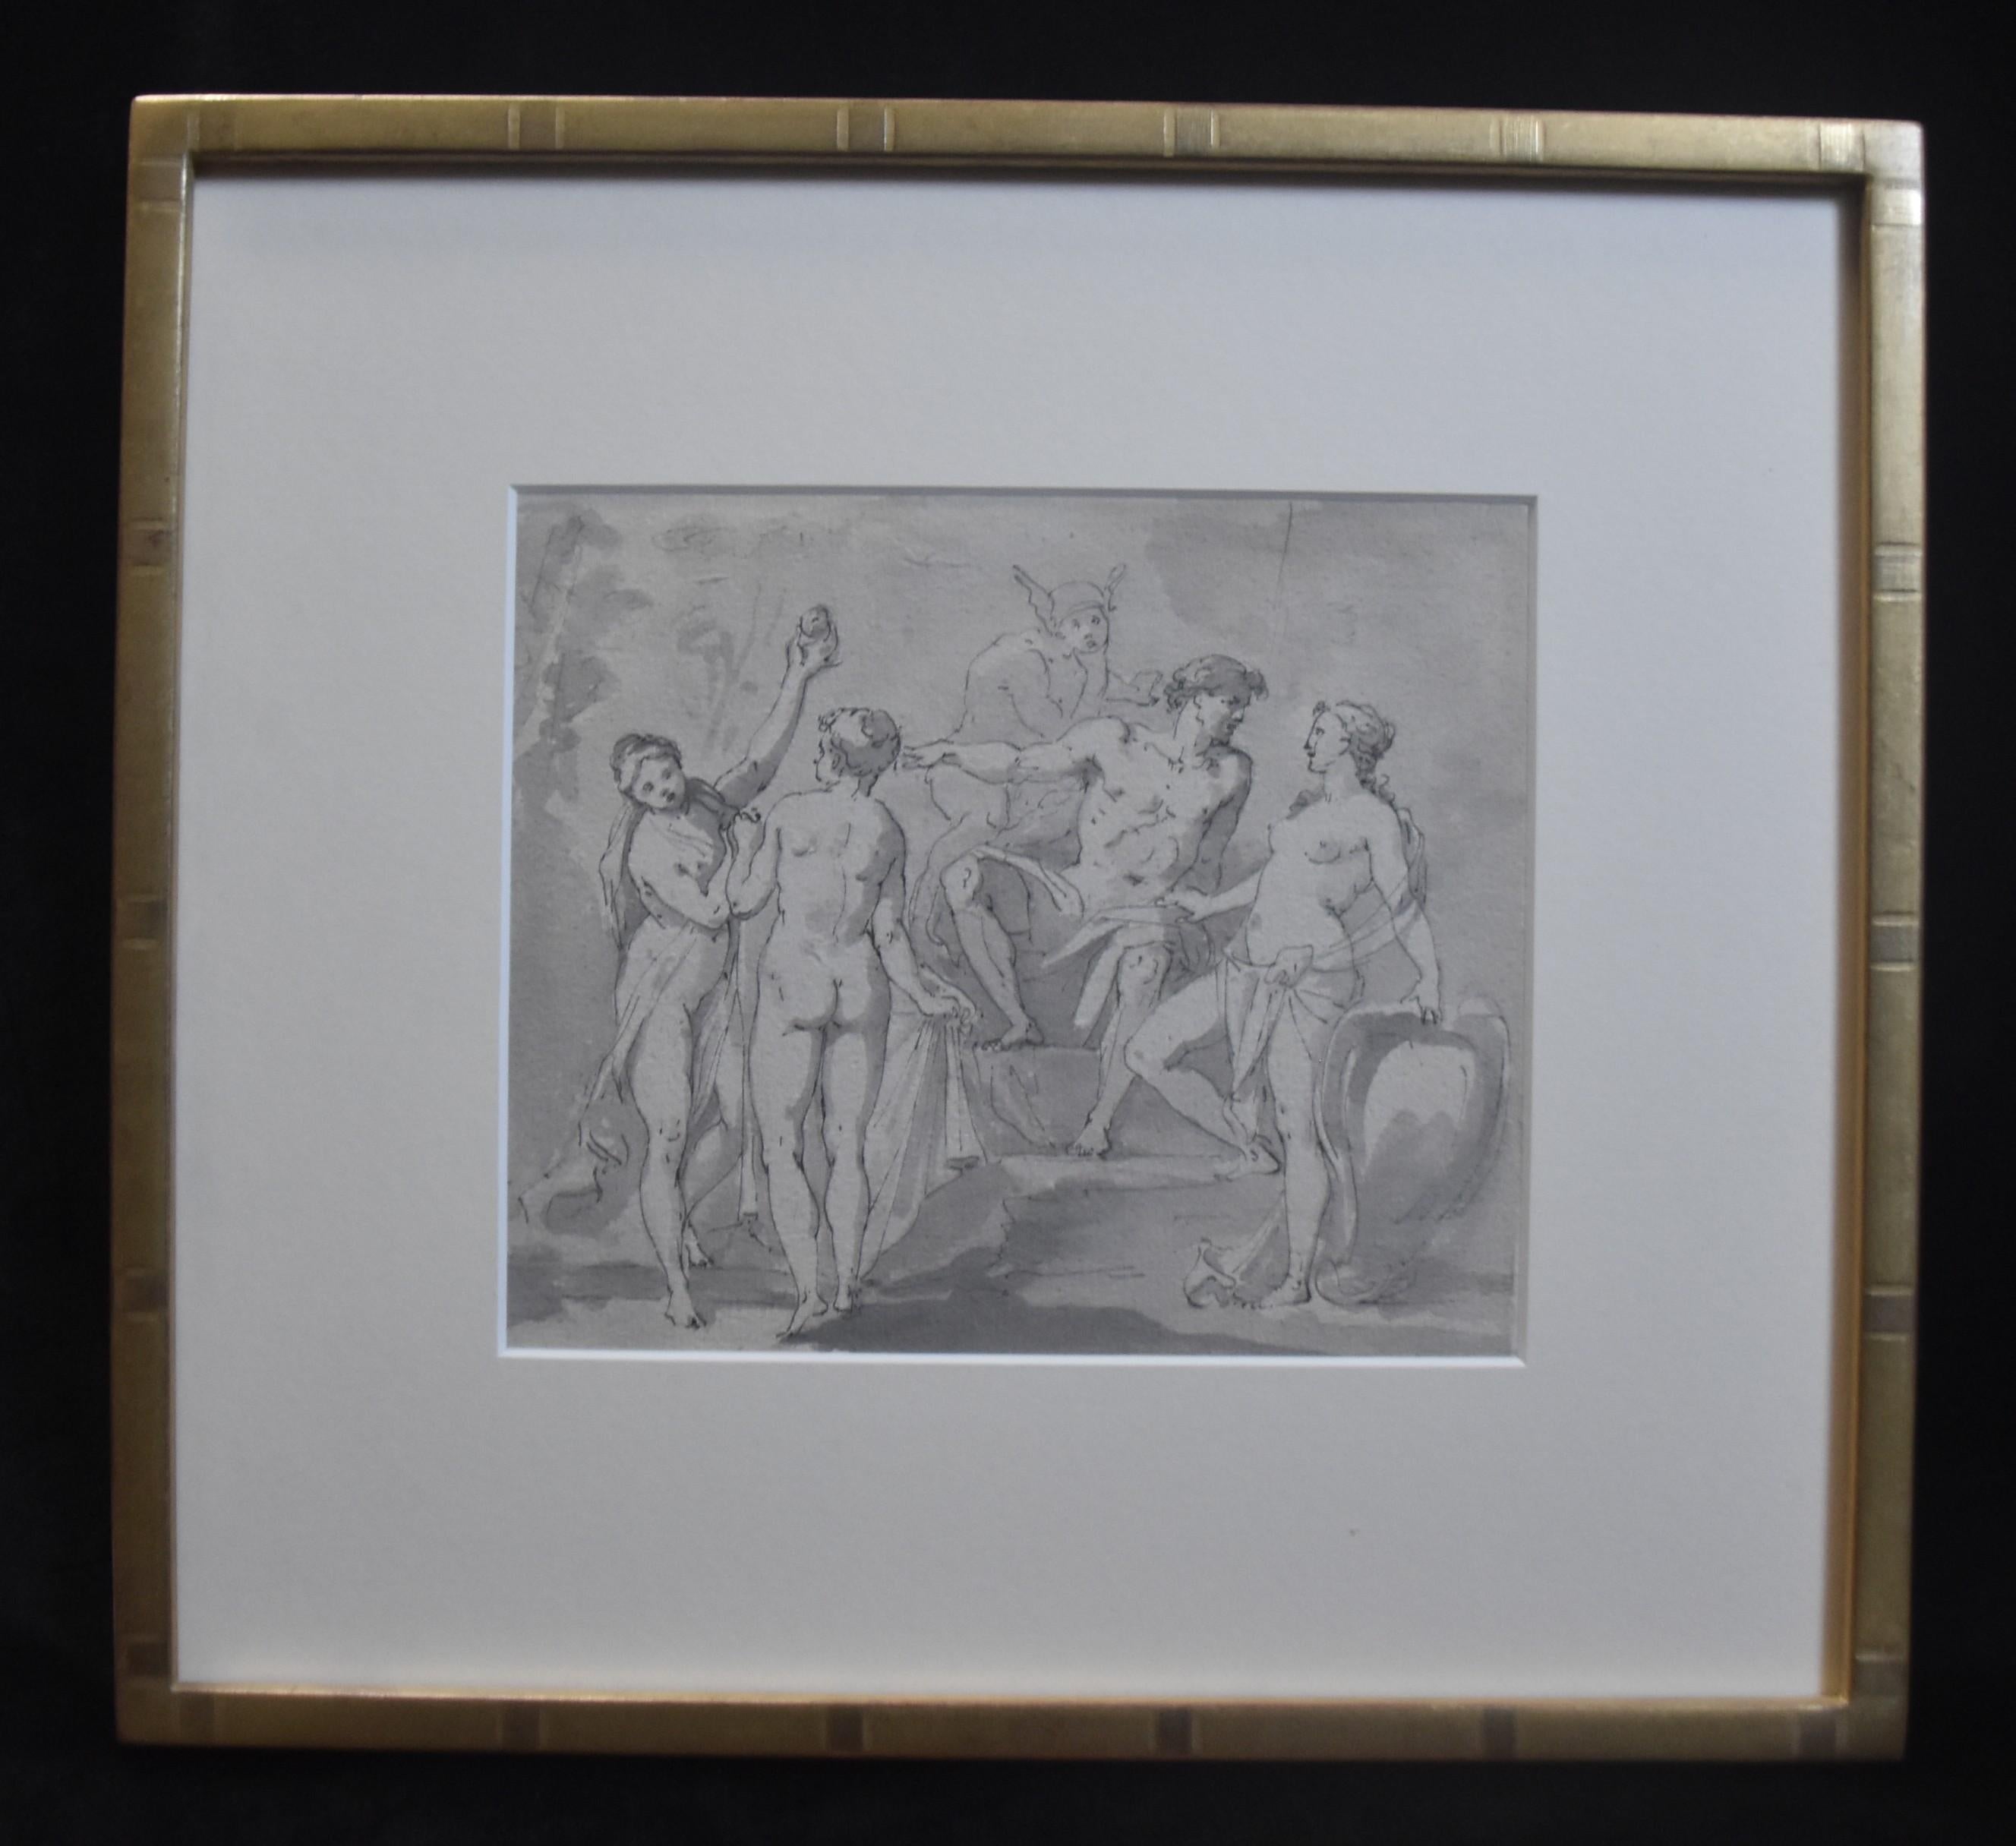 French School 18th century, The Judgement of Paris, original drawing - Art by Unknown